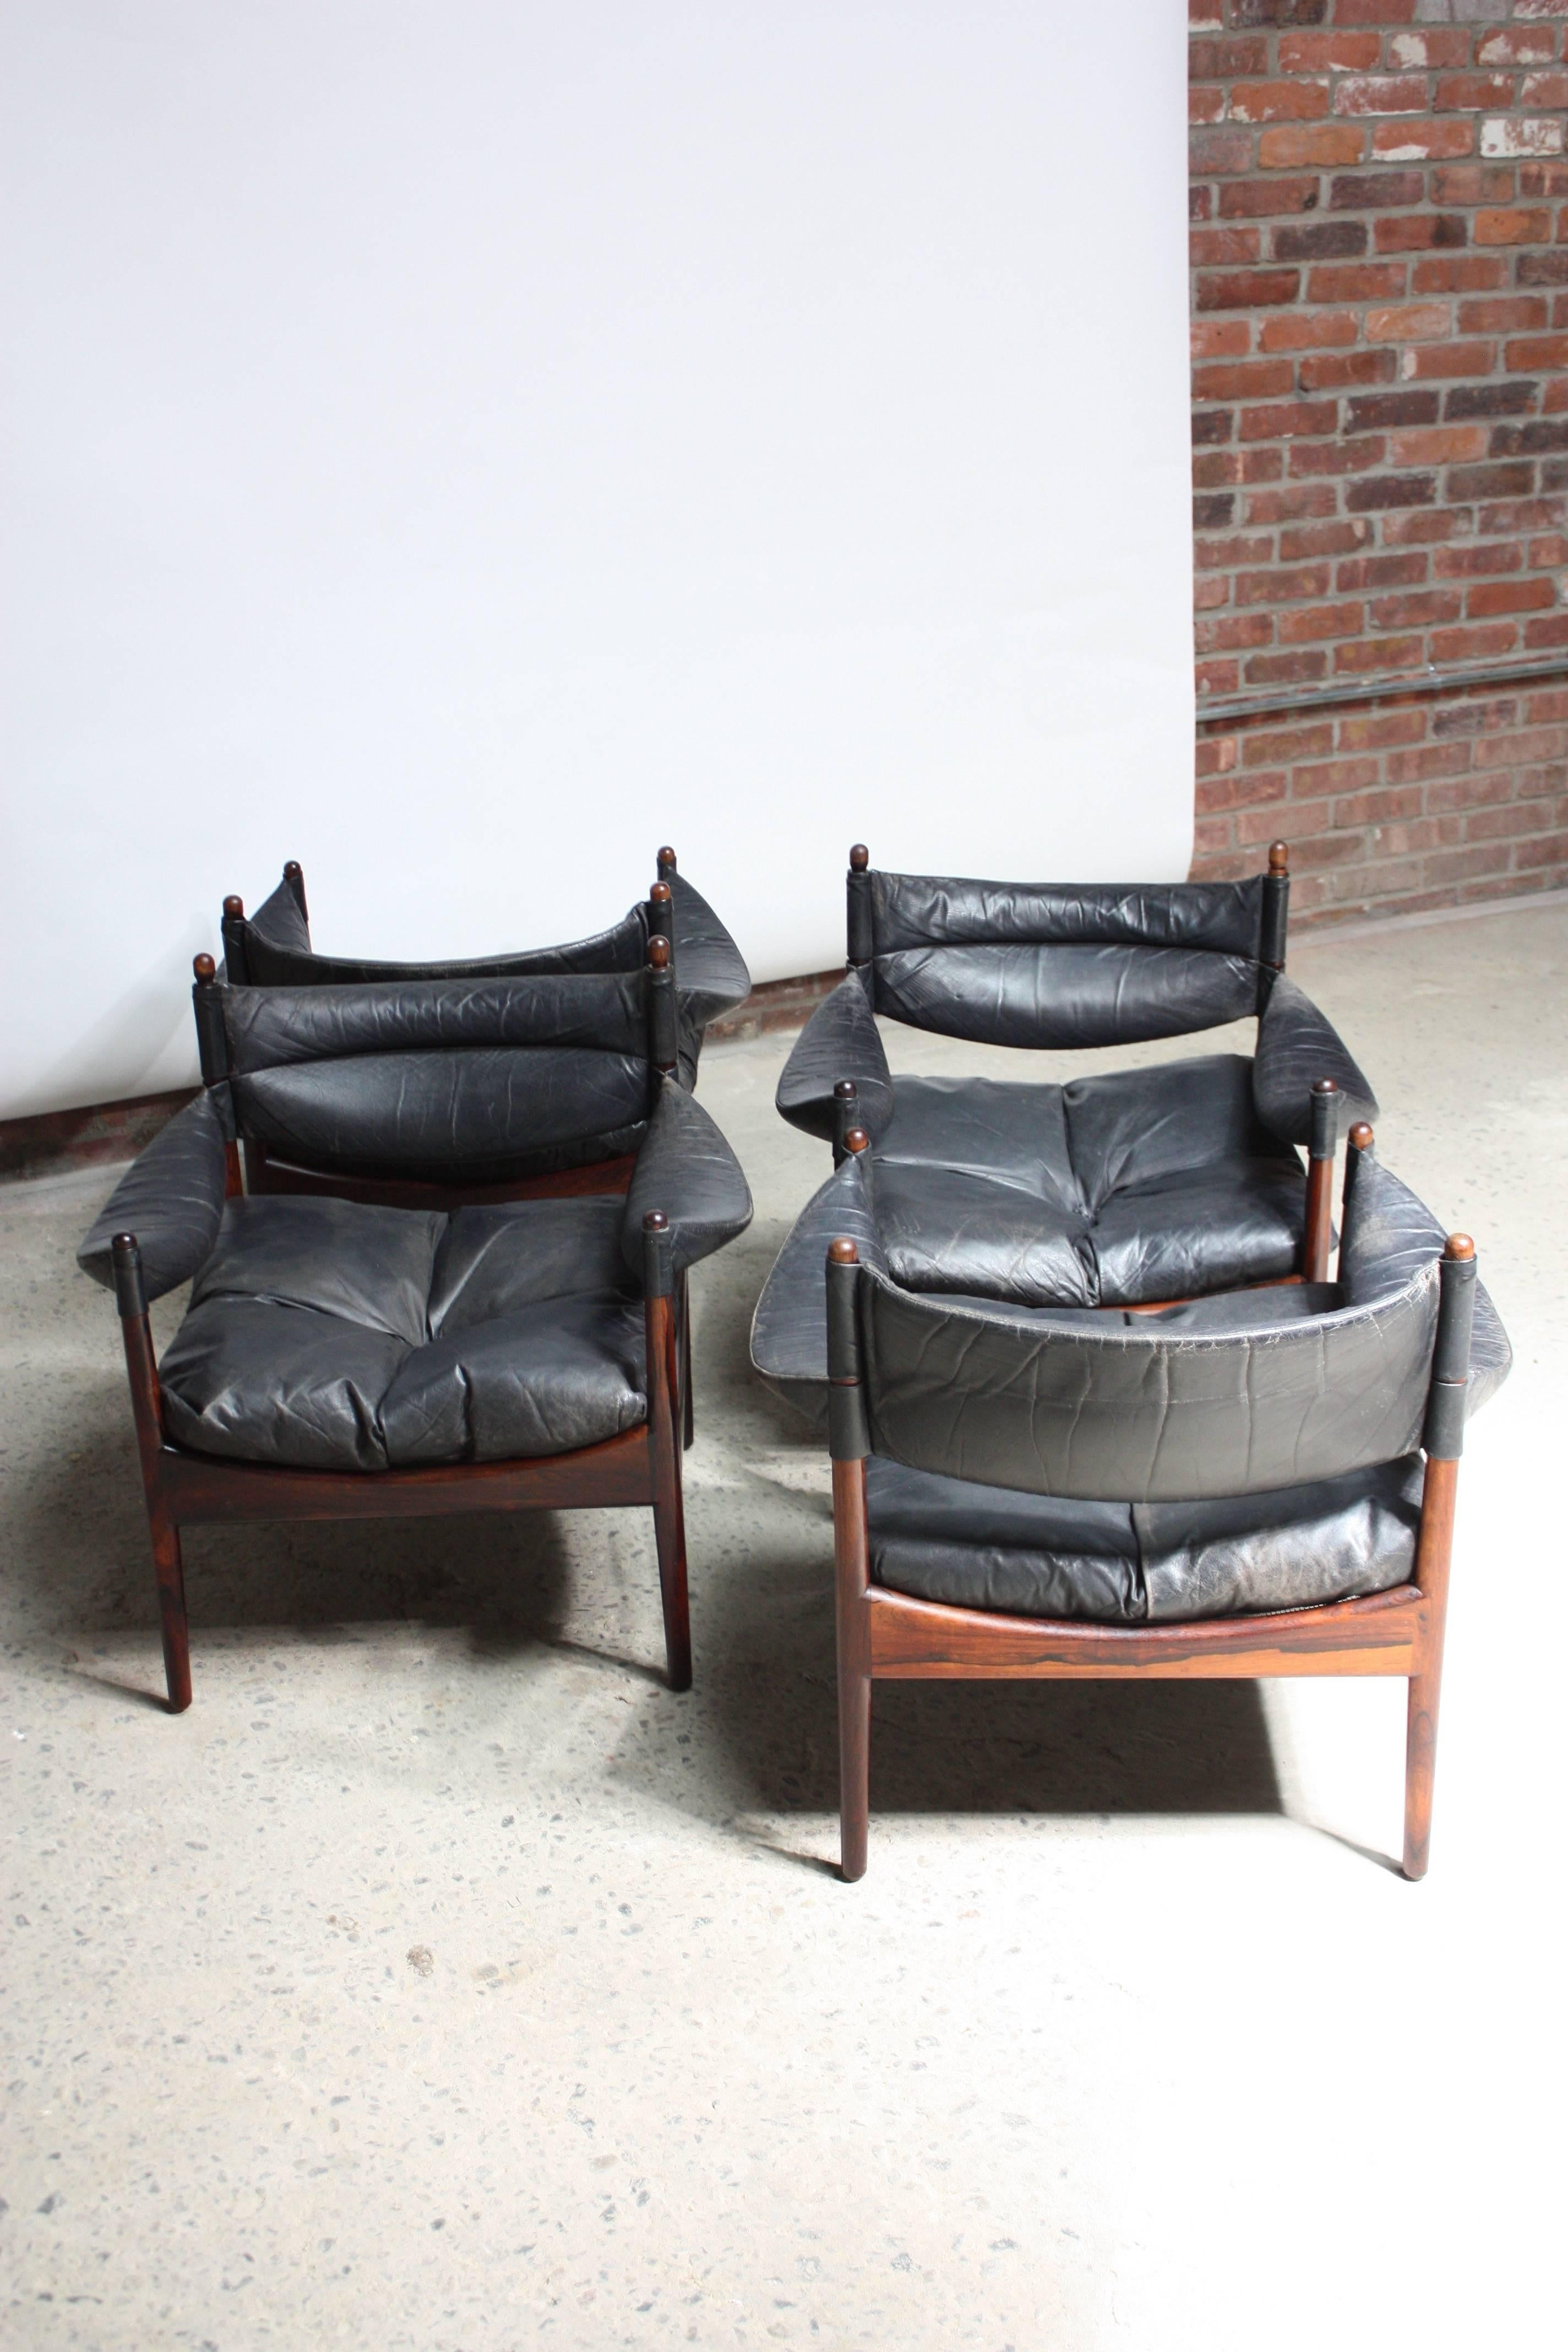 This set of four Kristian Solmer Vedel 'Modus' lounge chairs in rosewood and black leather is in good, vintage condition, with nice age/wear to the leather. The original owner had an Arne Jacobsen '6-star series' rosewood table custom-made to fit